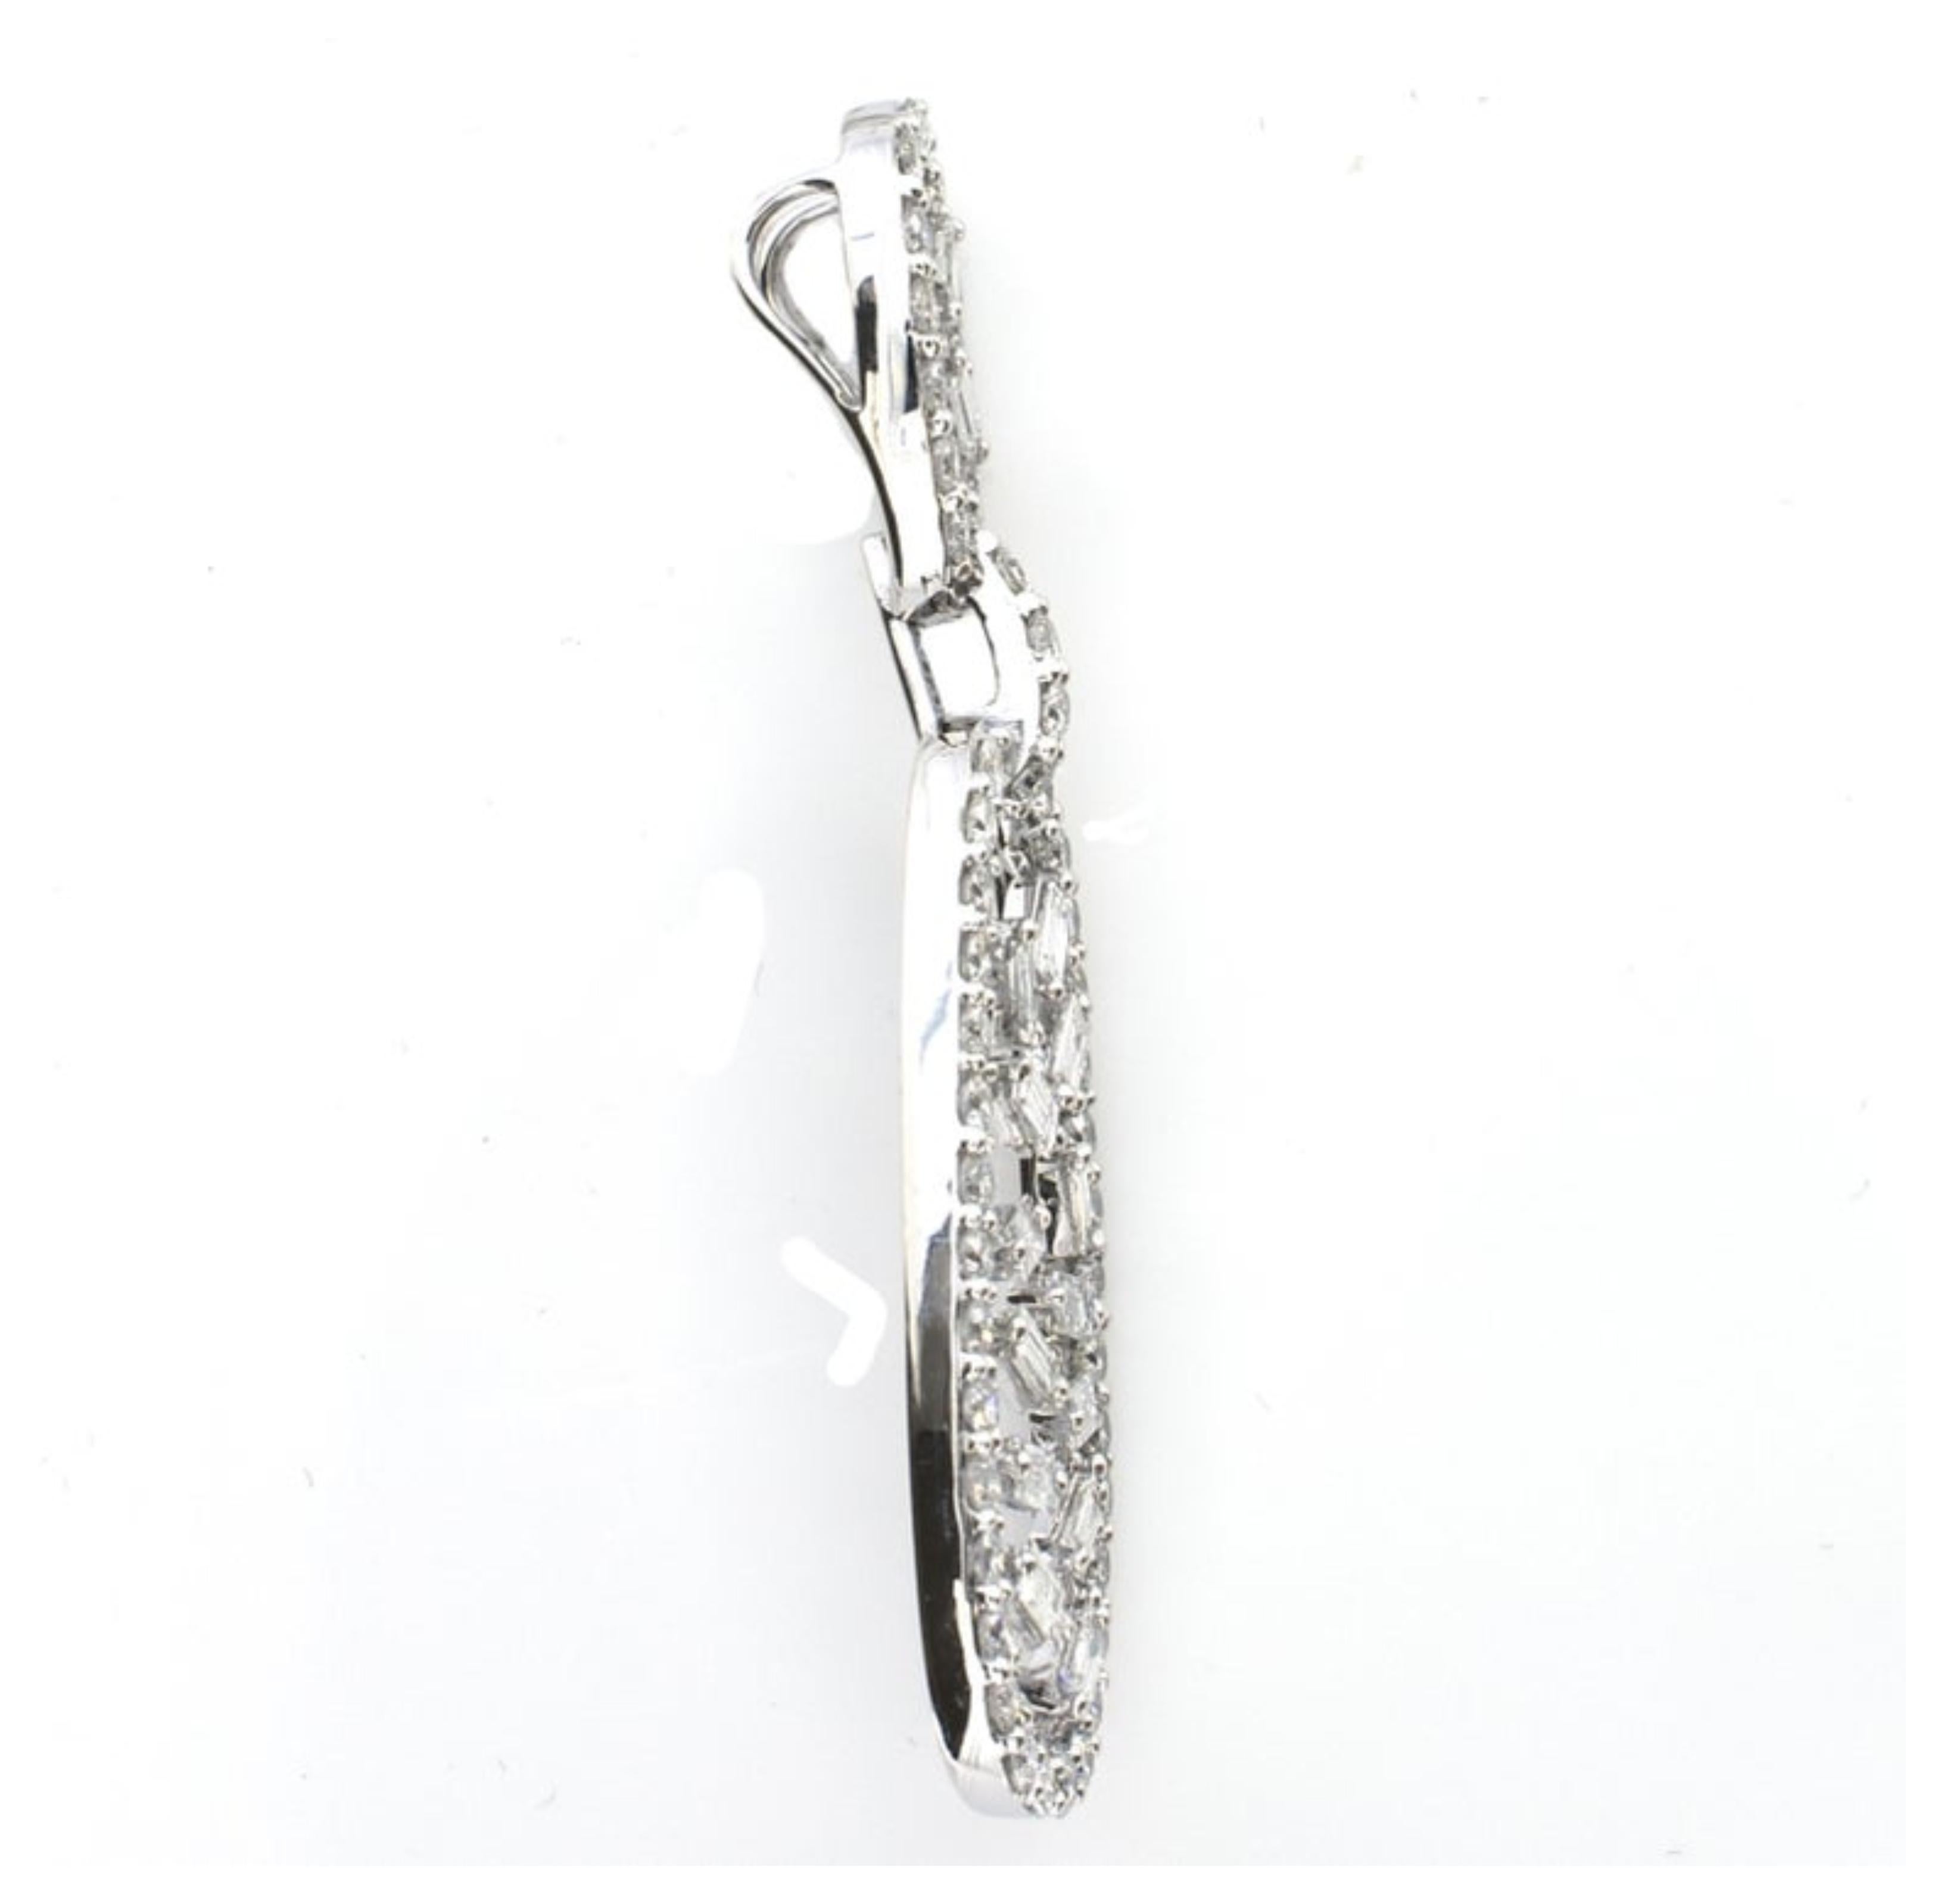 This beautiful 2.94 Carat Baguette Fashion Diamond Pendant features streaming down design of baguette diamonds. This pendant features 1.19 Carats of Baguette Diamonds and 1.75 Carats of Round White Diamonds. The pendant is set in 18K White Gold and